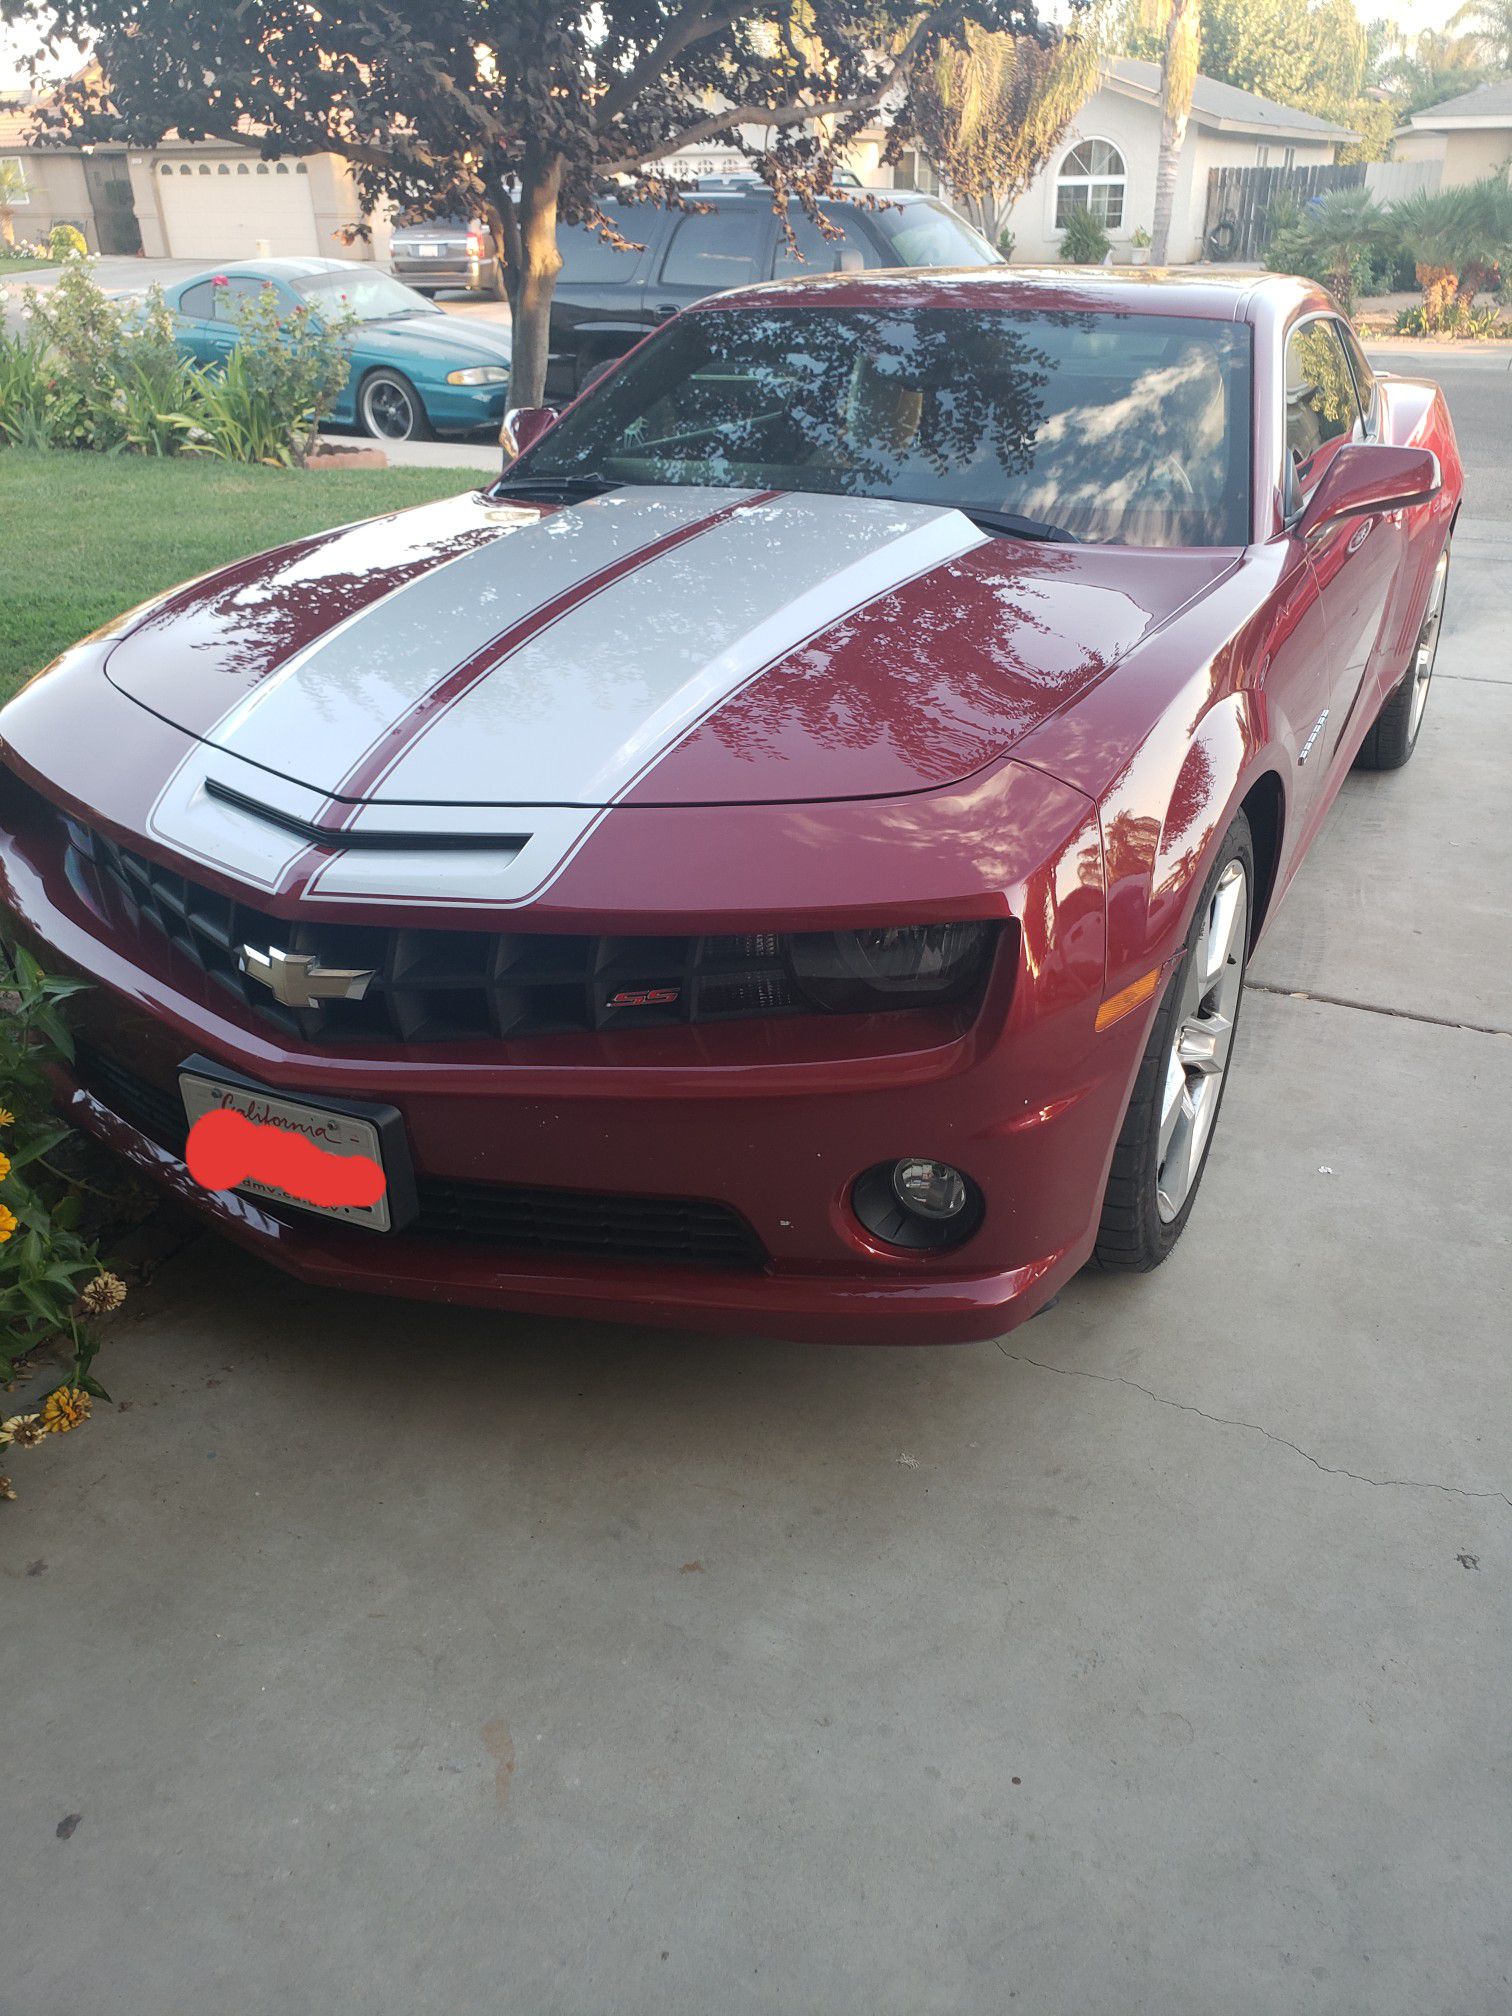 2011 Camaro SS Runs good the title is salvage no problems with it just trying to sell it because I need to get a family car